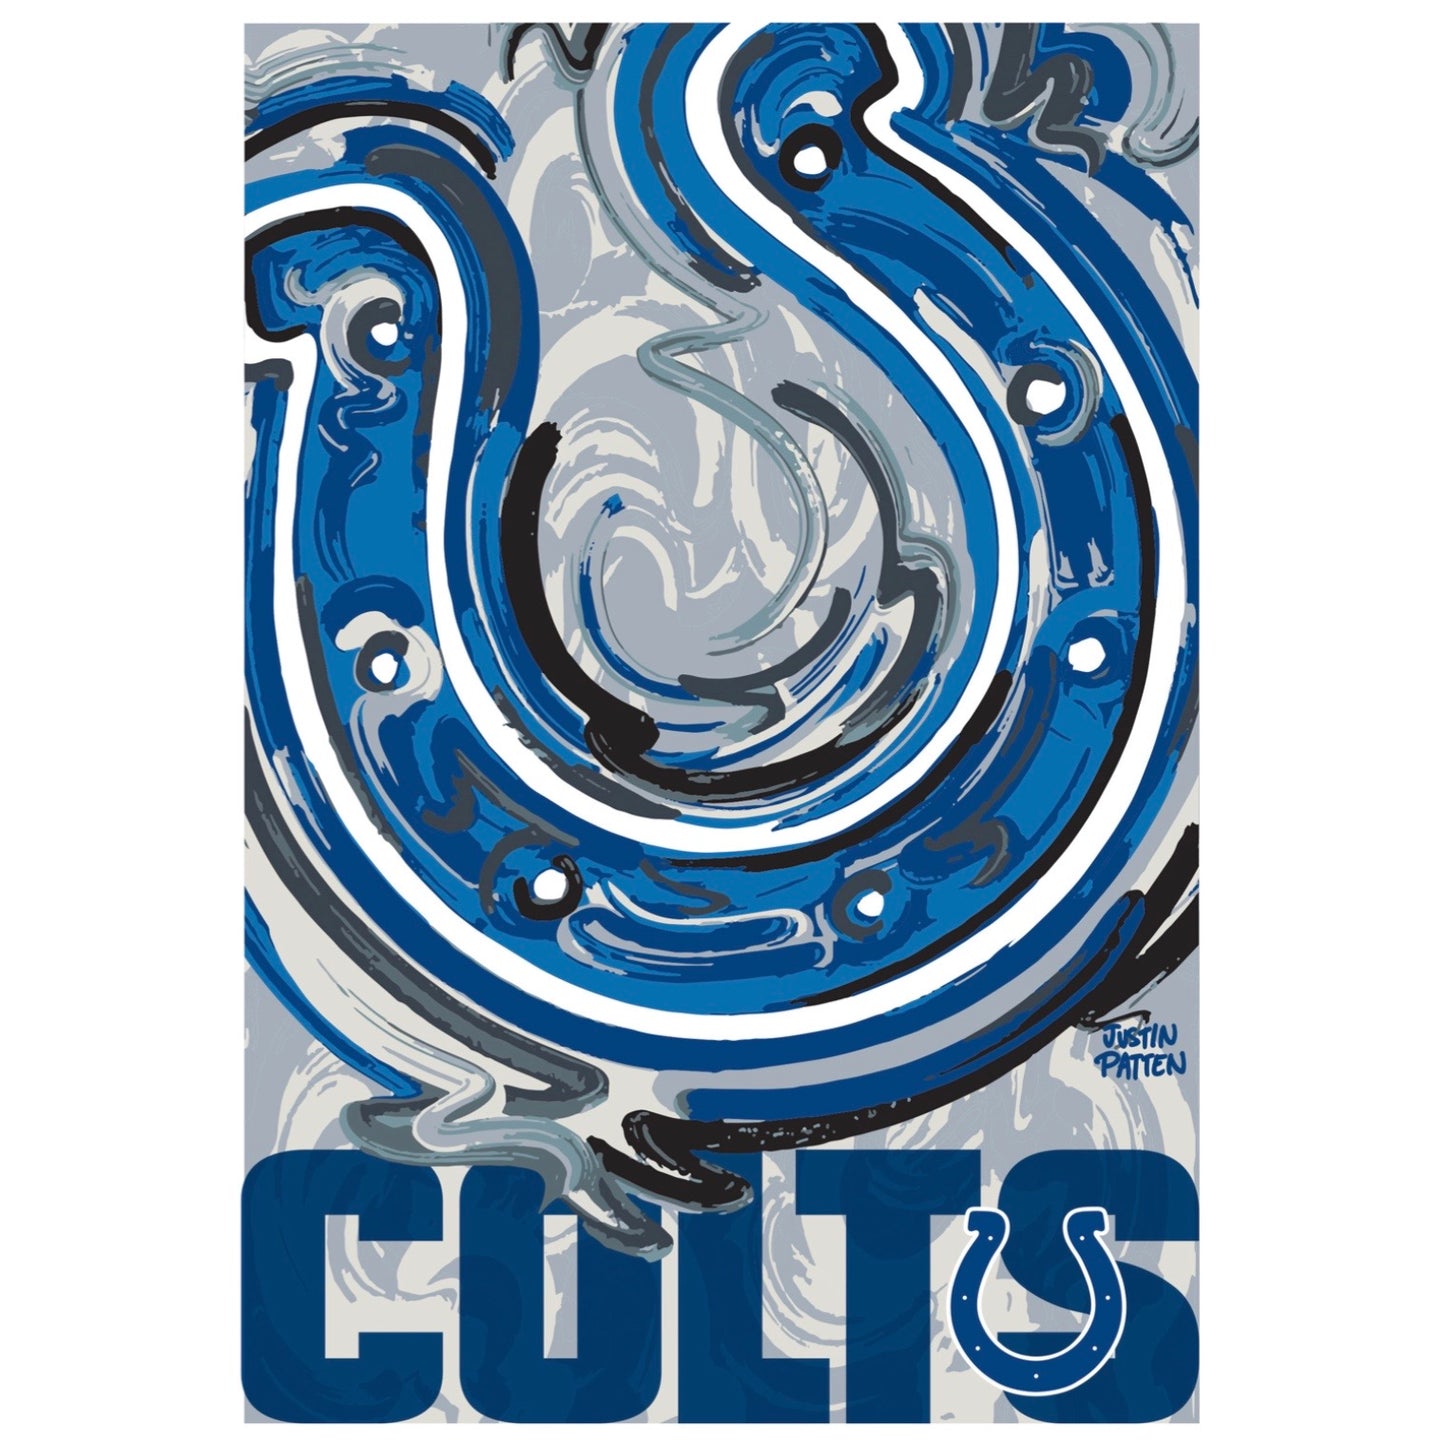 Indianapolis Colts House Flag 29" x 43" by Justin Patten